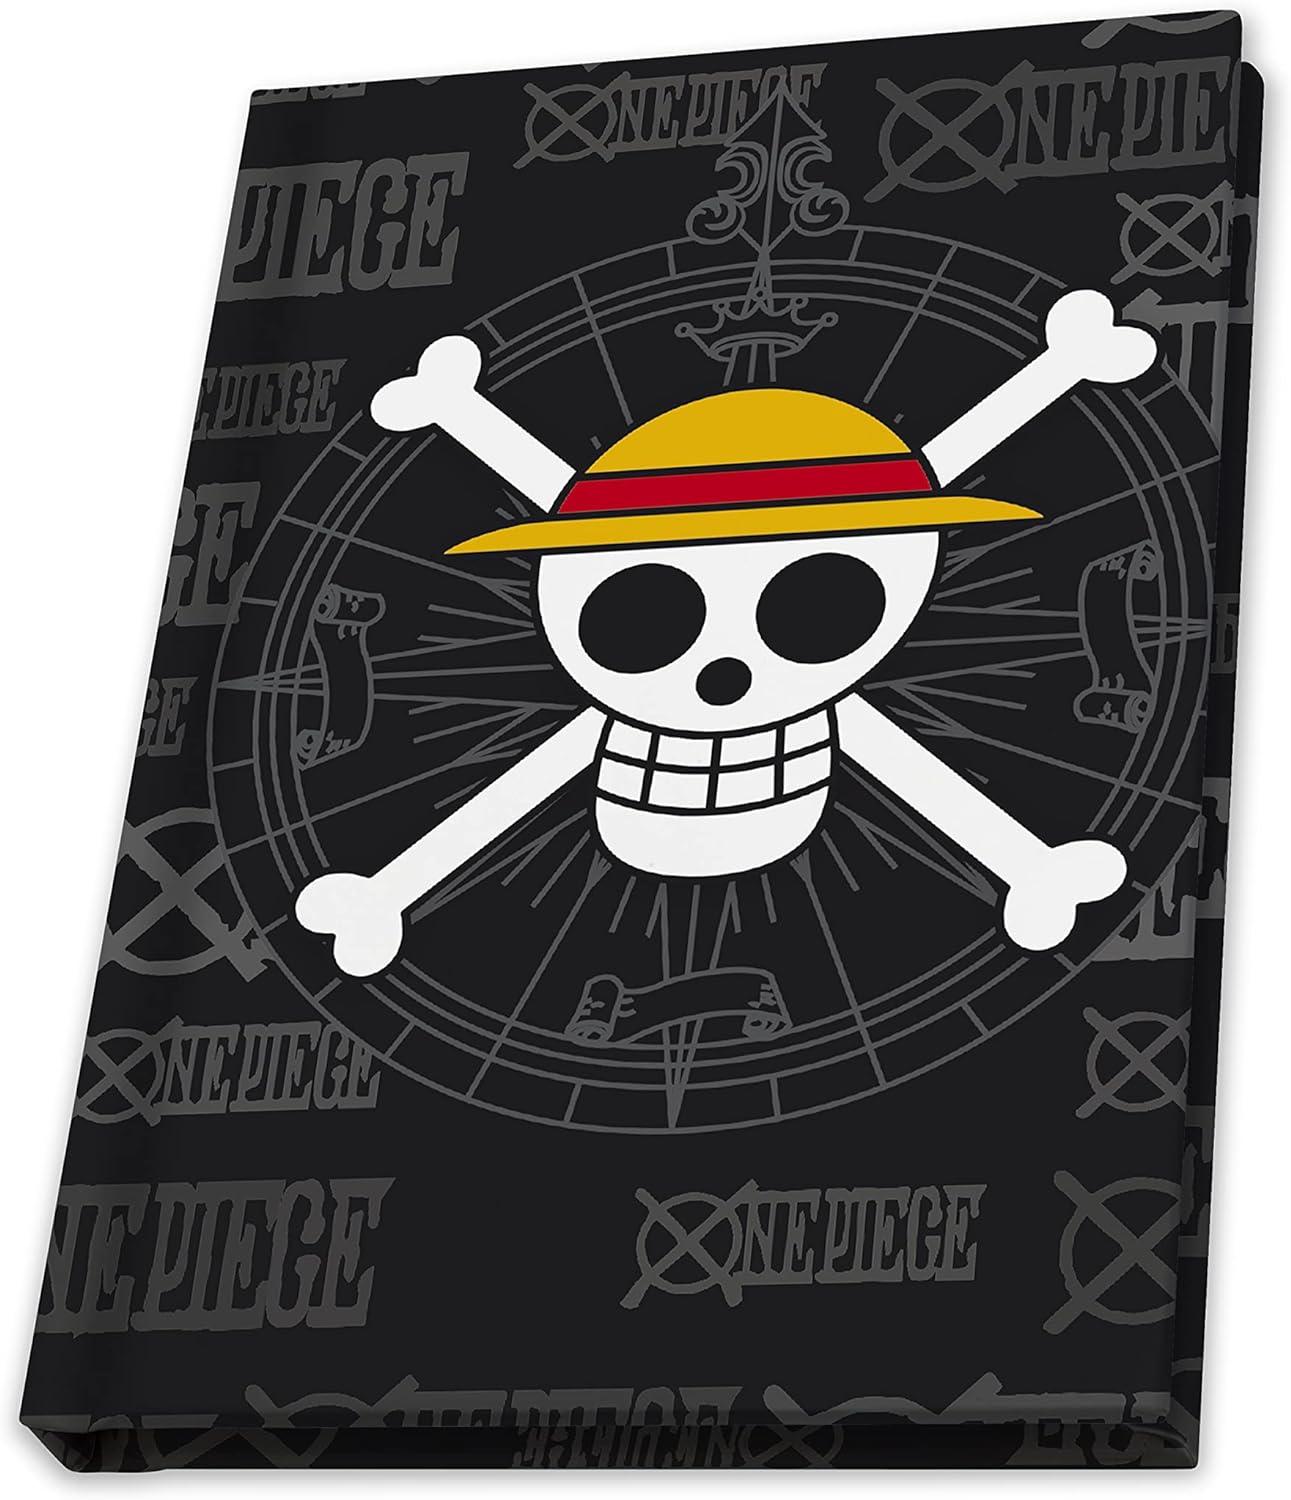 One Piece Straw Hat Jolly Roger Crew Gift Set - Glass, Notebook, and Pin Anime 3 Pcs